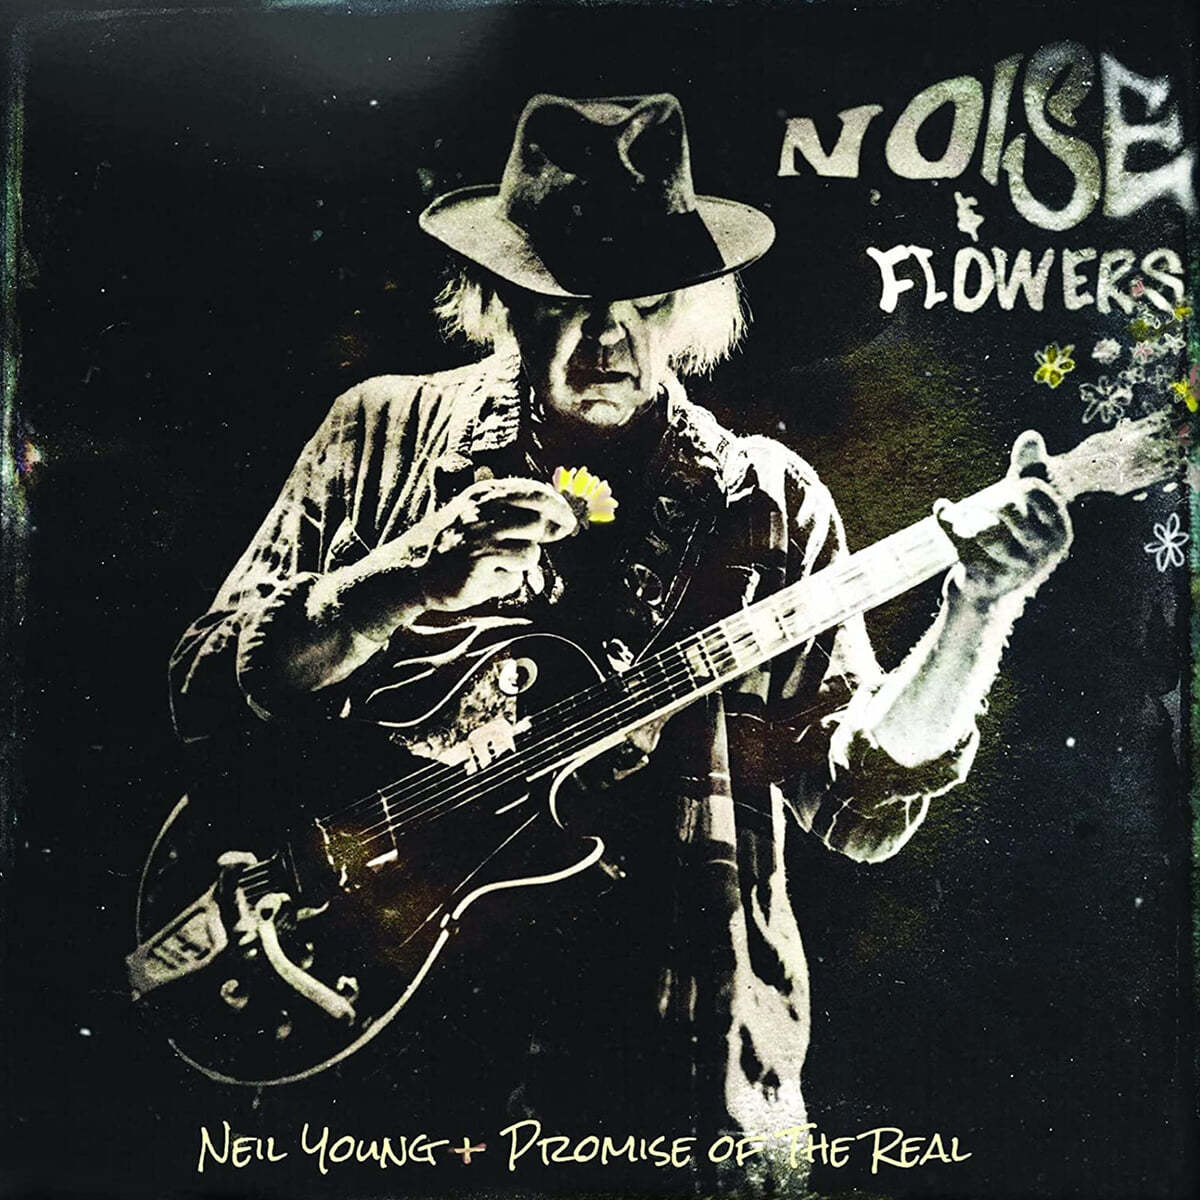 Neil Young / Promise Of The Real (닐 영 / 프로미스 오브 더 리얼) - Noise And Flowers 